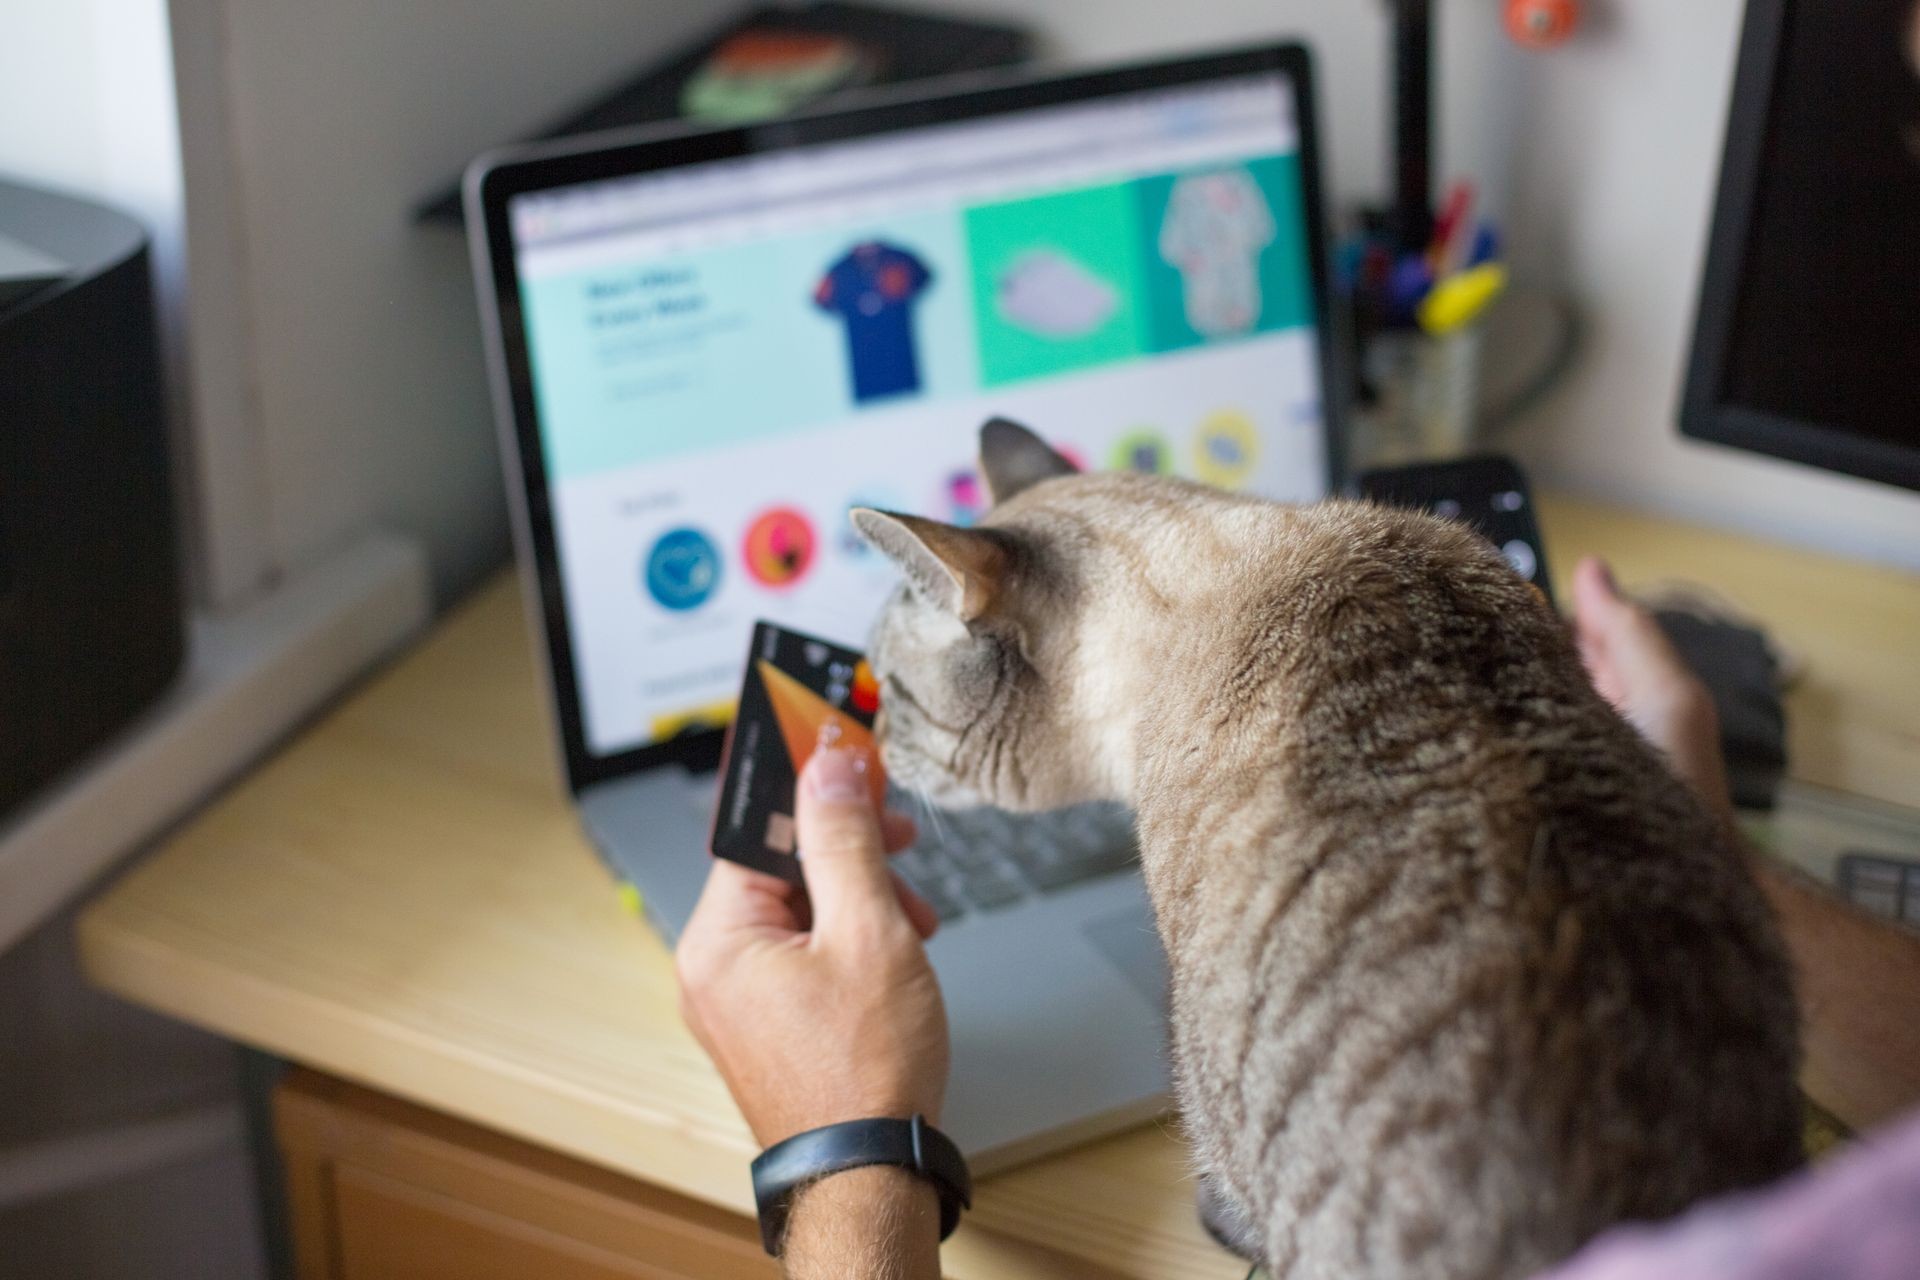 Man with a grey cat shopping online, holding credit card 